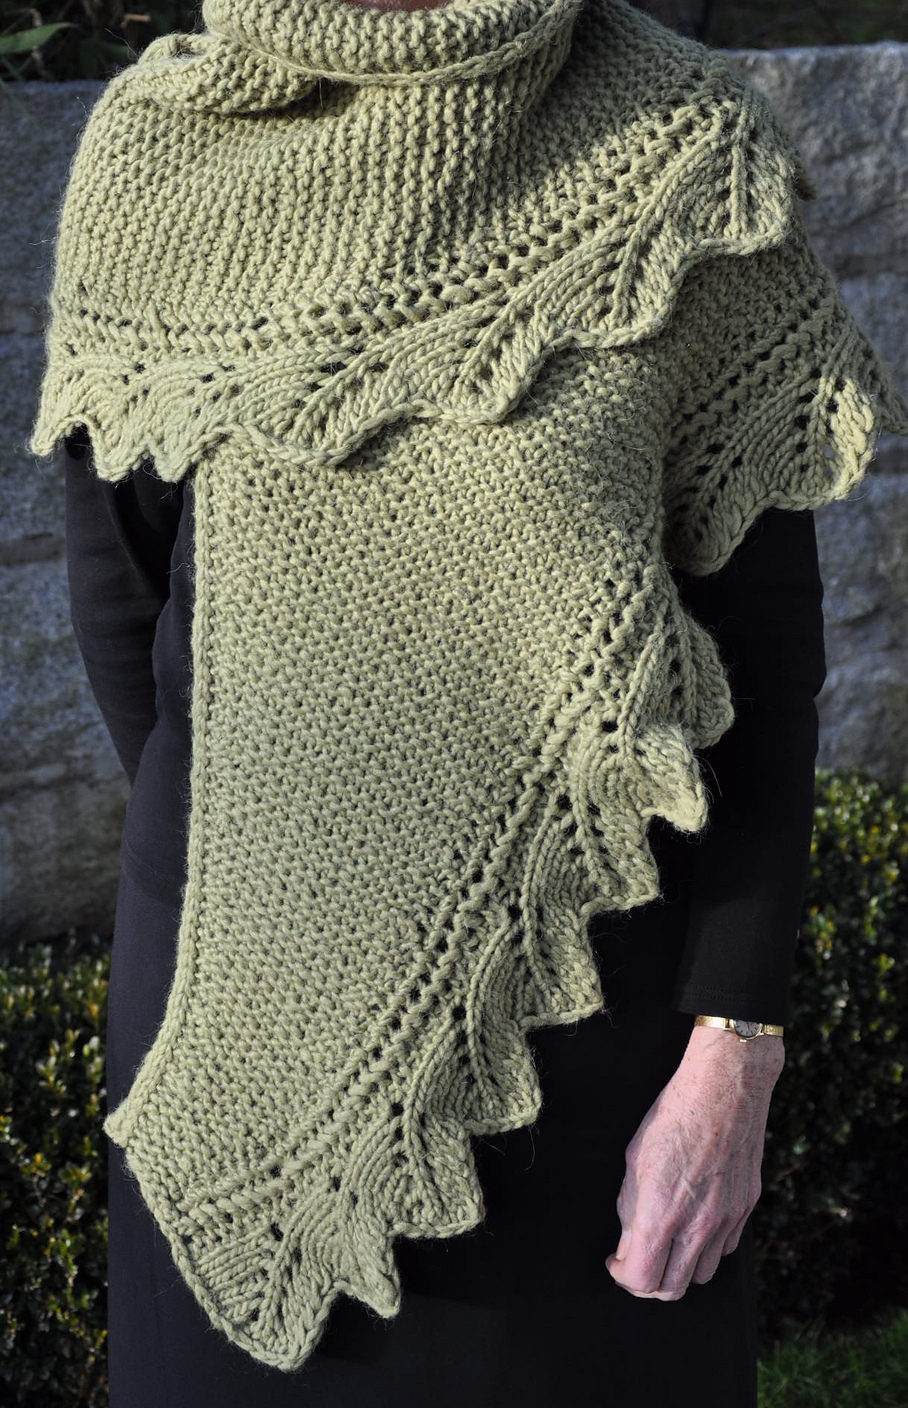 Shawls for Bulky Yarn Knitting Patterns | In the Loop Knitting